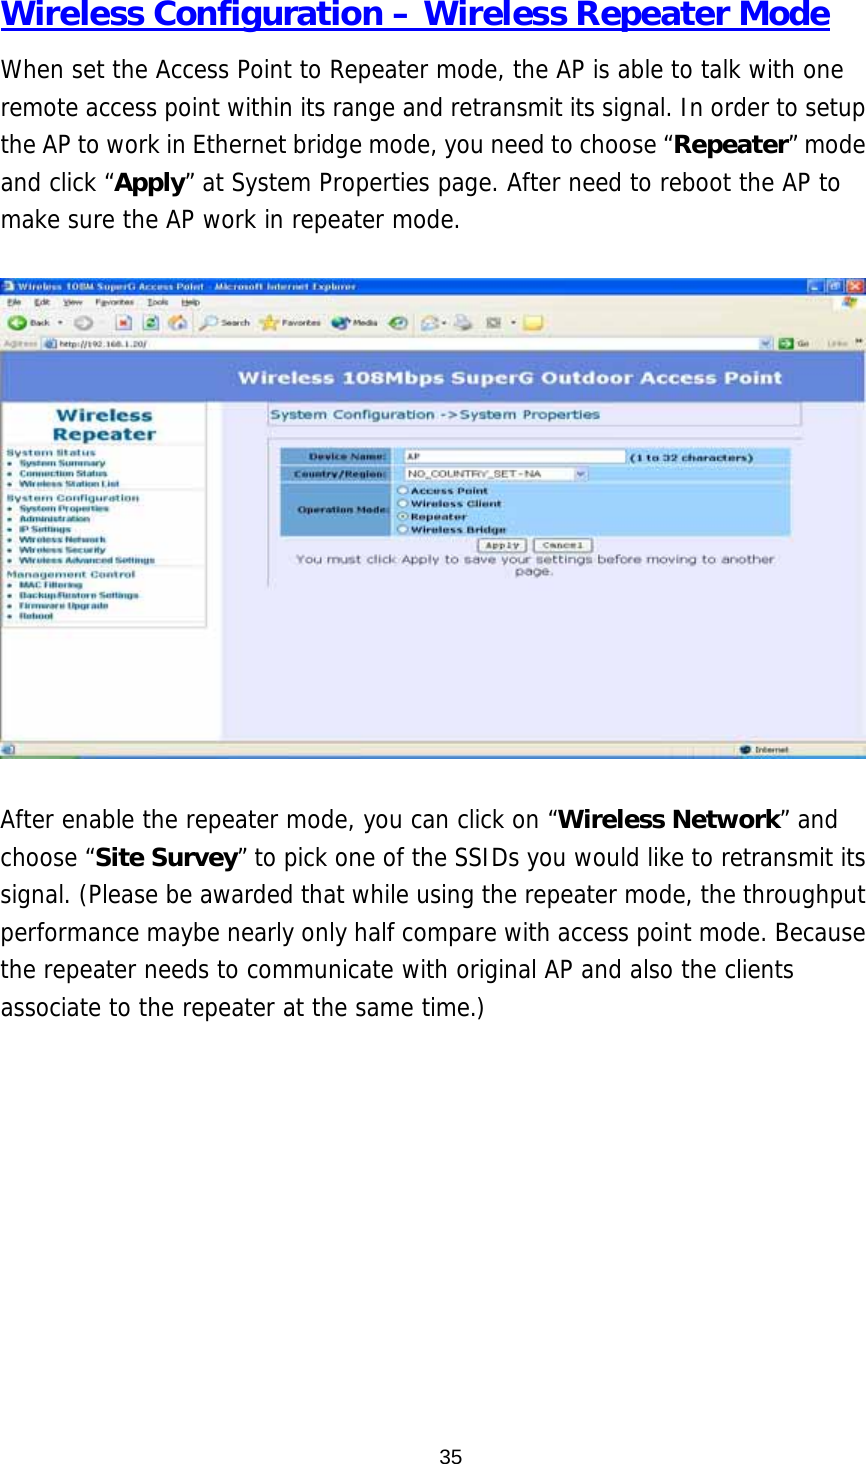  35Wireless Configuration – Wireless Repeater Mode When set the Access Point to Repeater mode, the AP is able to talk with one remote access point within its range and retransmit its signal. In order to setup the AP to work in Ethernet bridge mode, you need to choose “Repeater” mode and click “Apply” at System Properties page. After need to reboot the AP to make sure the AP work in repeater mode.    After enable the repeater mode, you can click on “Wireless Network” and choose “Site Survey” to pick one of the SSIDs you would like to retransmit its signal. (Please be awarded that while using the repeater mode, the throughput performance maybe nearly only half compare with access point mode. Because the repeater needs to communicate with original AP and also the clients associate to the repeater at the same time.)  